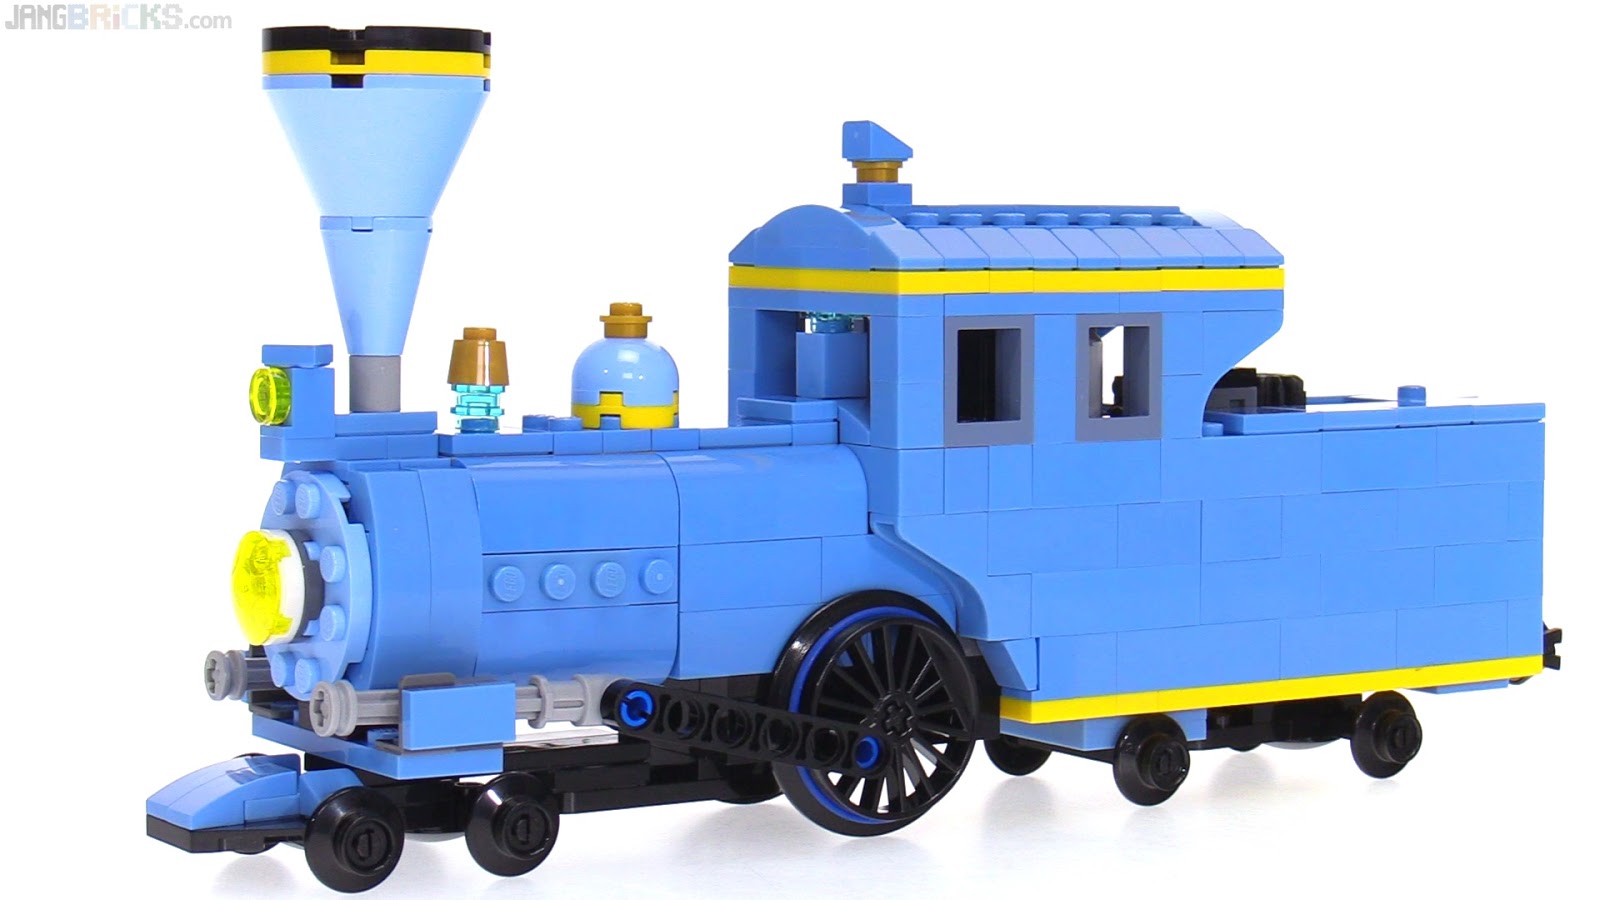 The Little Engine That Could in LEGO